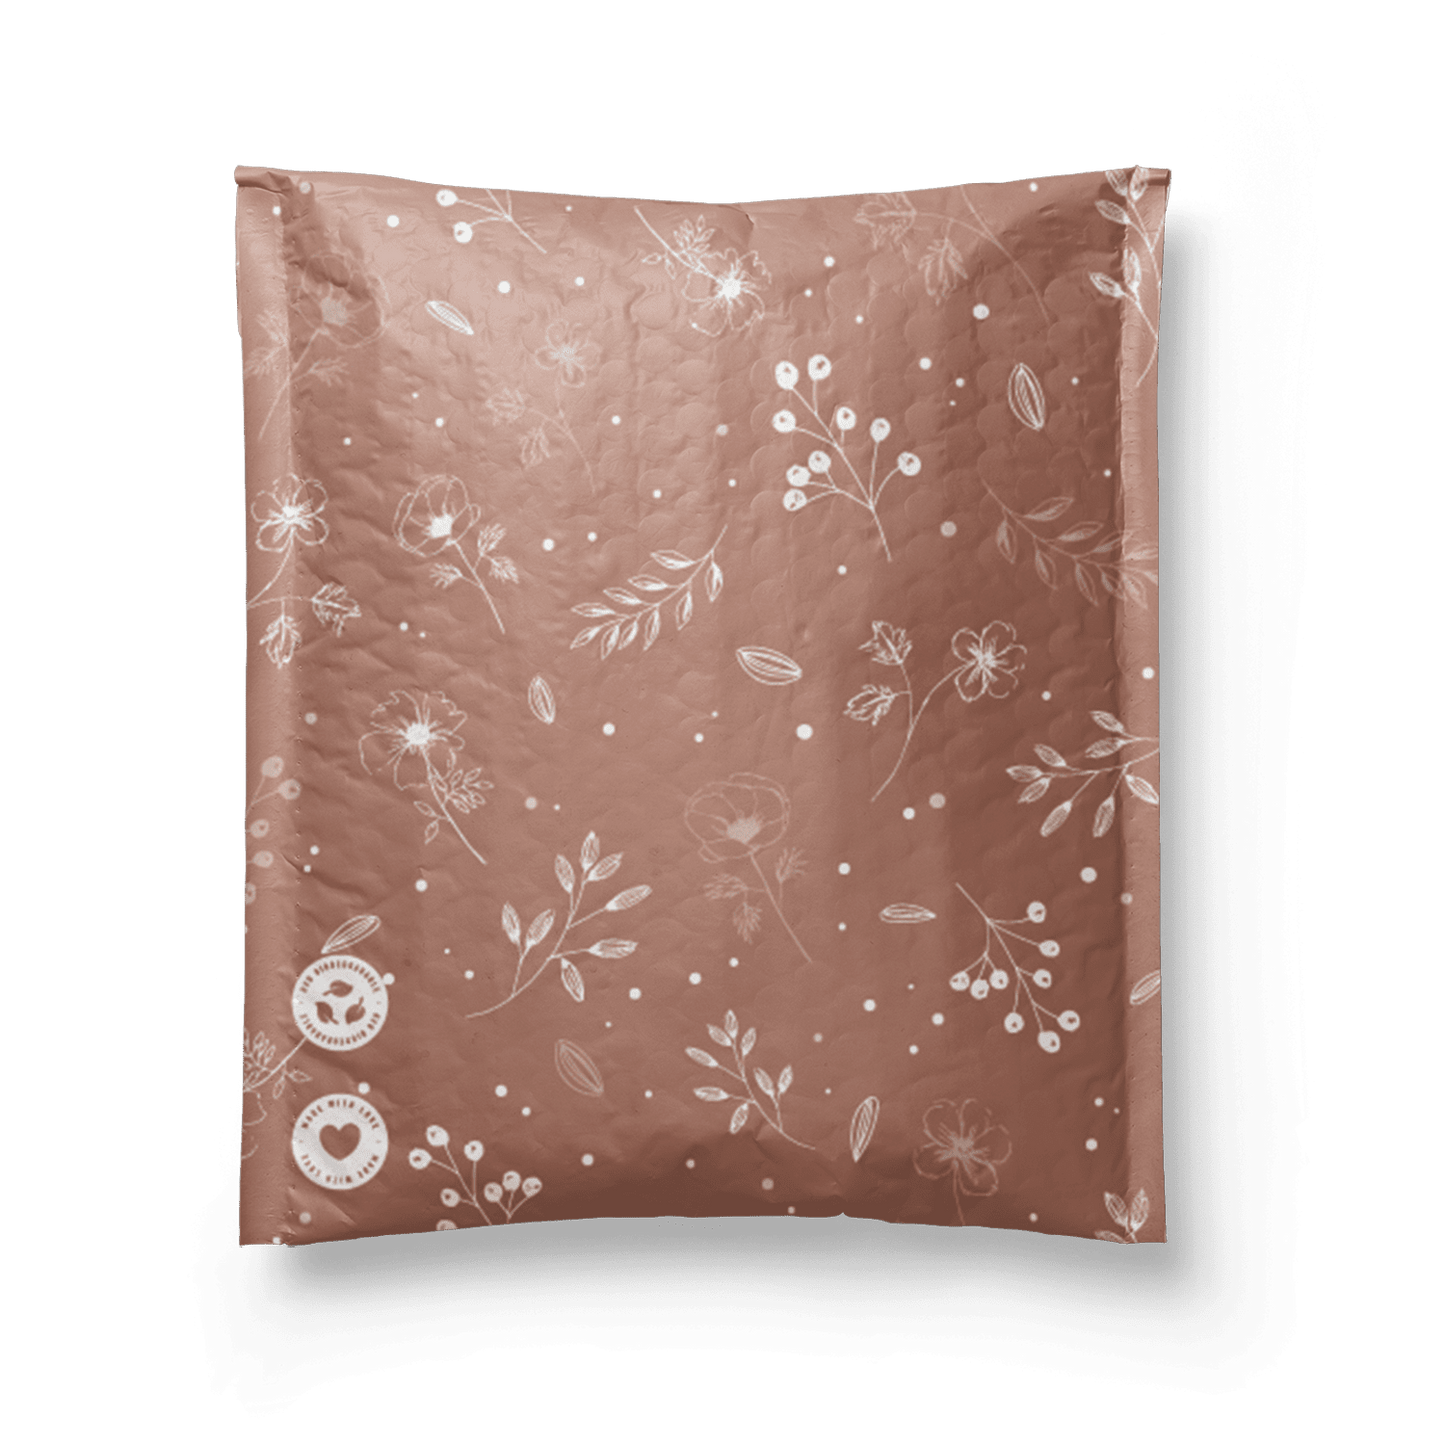 A Rosy Brown Biodegradable Bubble Mailer 6" x 9" with a floral pattern on it from impack.co.